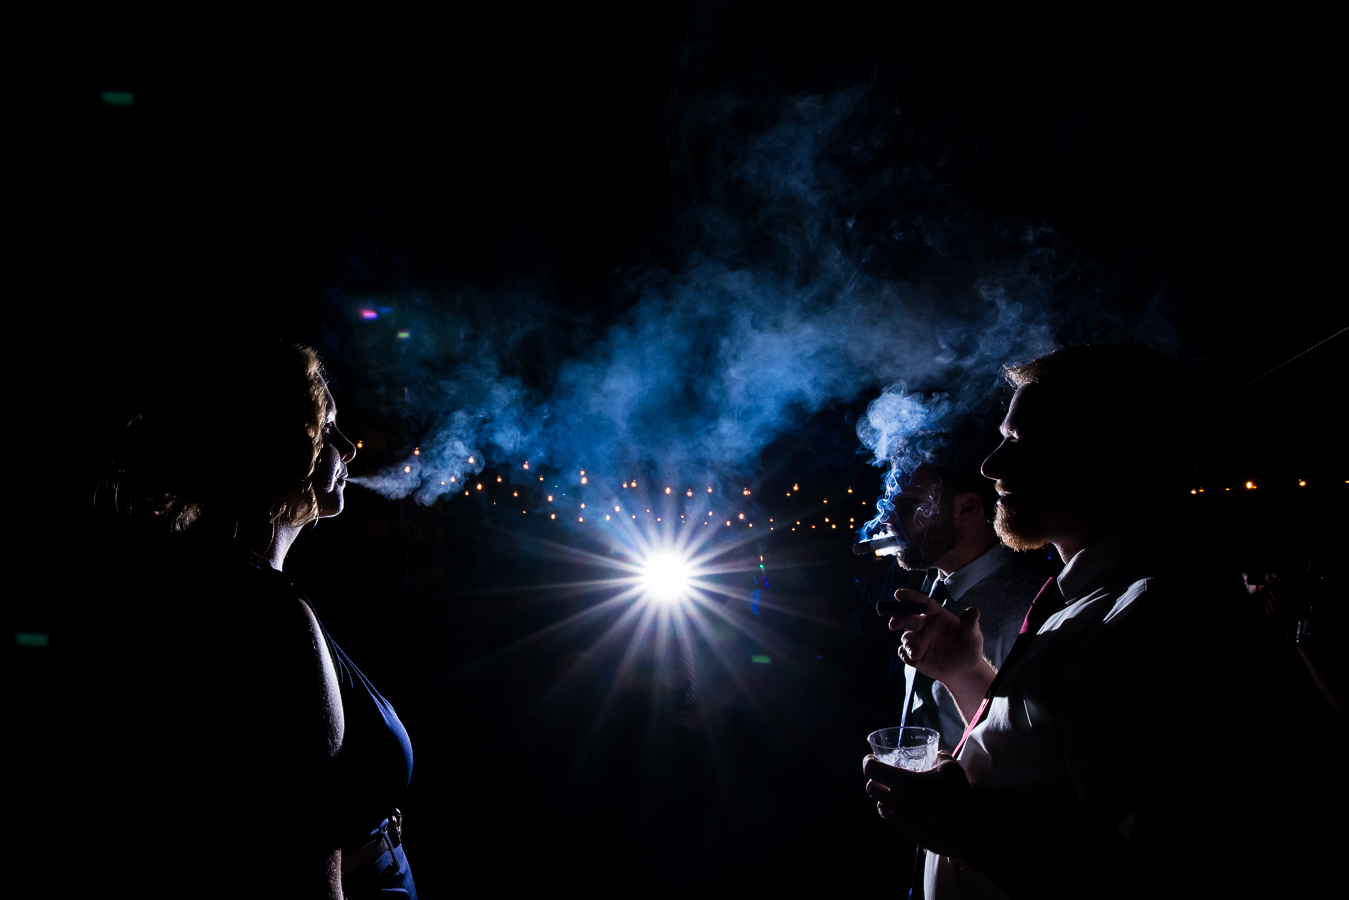 creative, fun image of guests as they smoke together and the smoke captured in the light of the night in stahlstown pa 